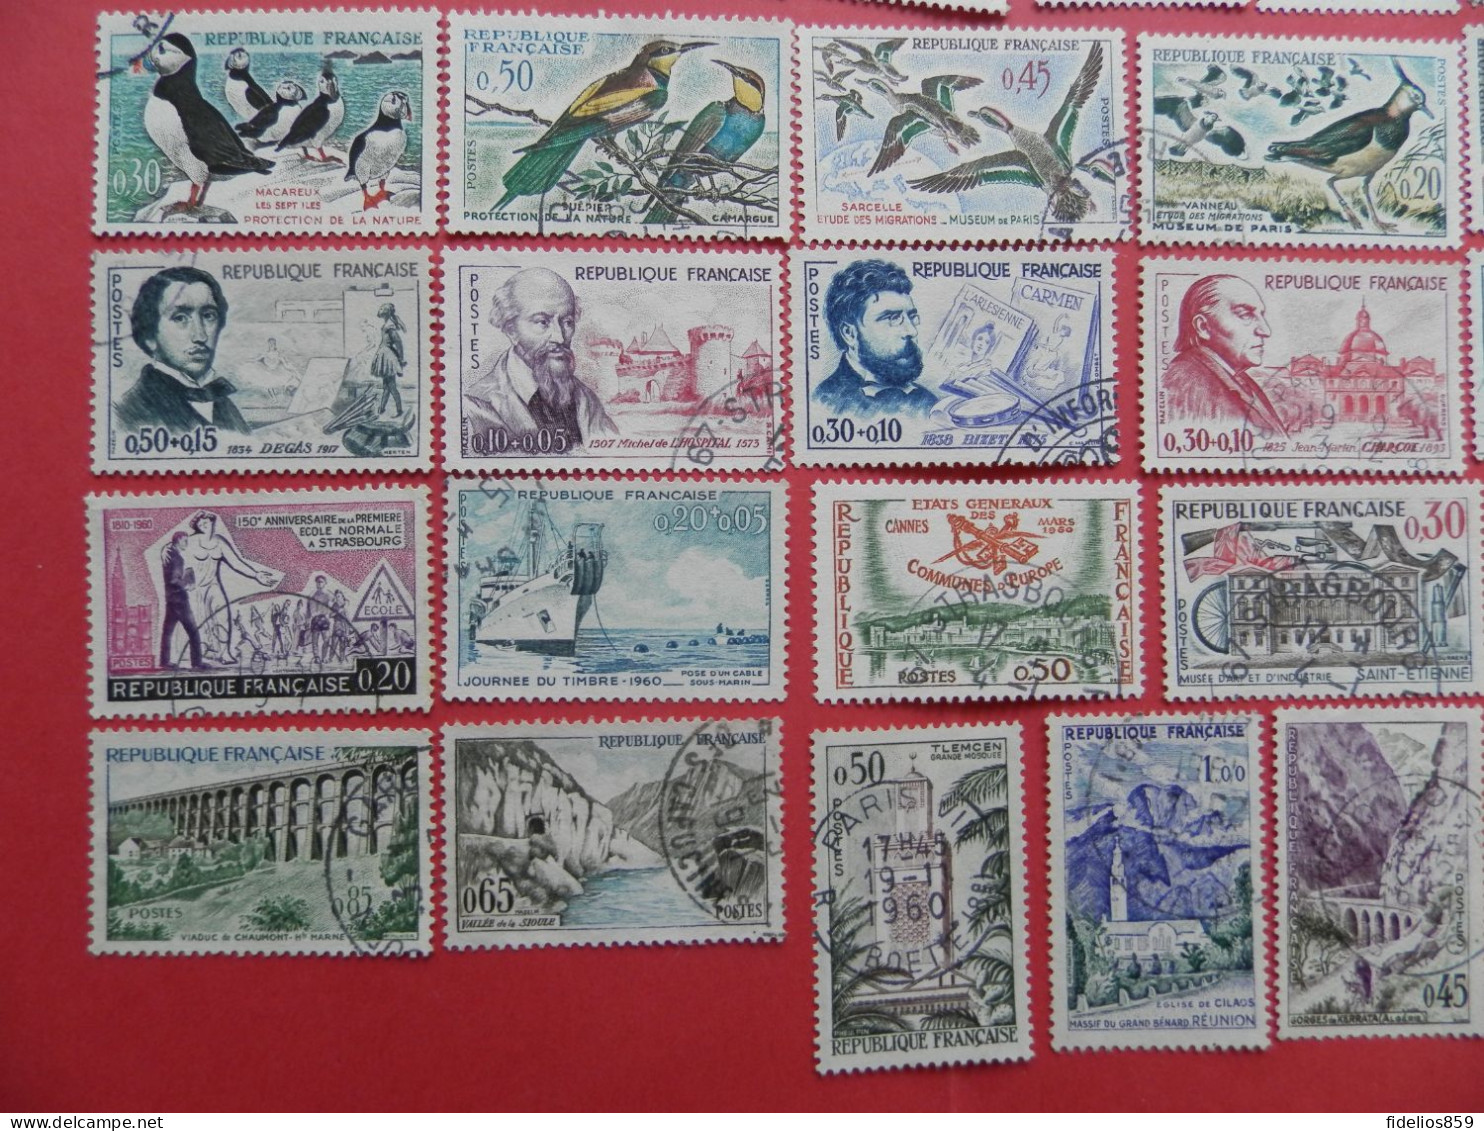 FRANCE : ANNEE COMPLETE 1960 SOIT 66 TIMBRES OBLITERES QUALITE LUXE (VOIR PHOTOS) - 1960-1969